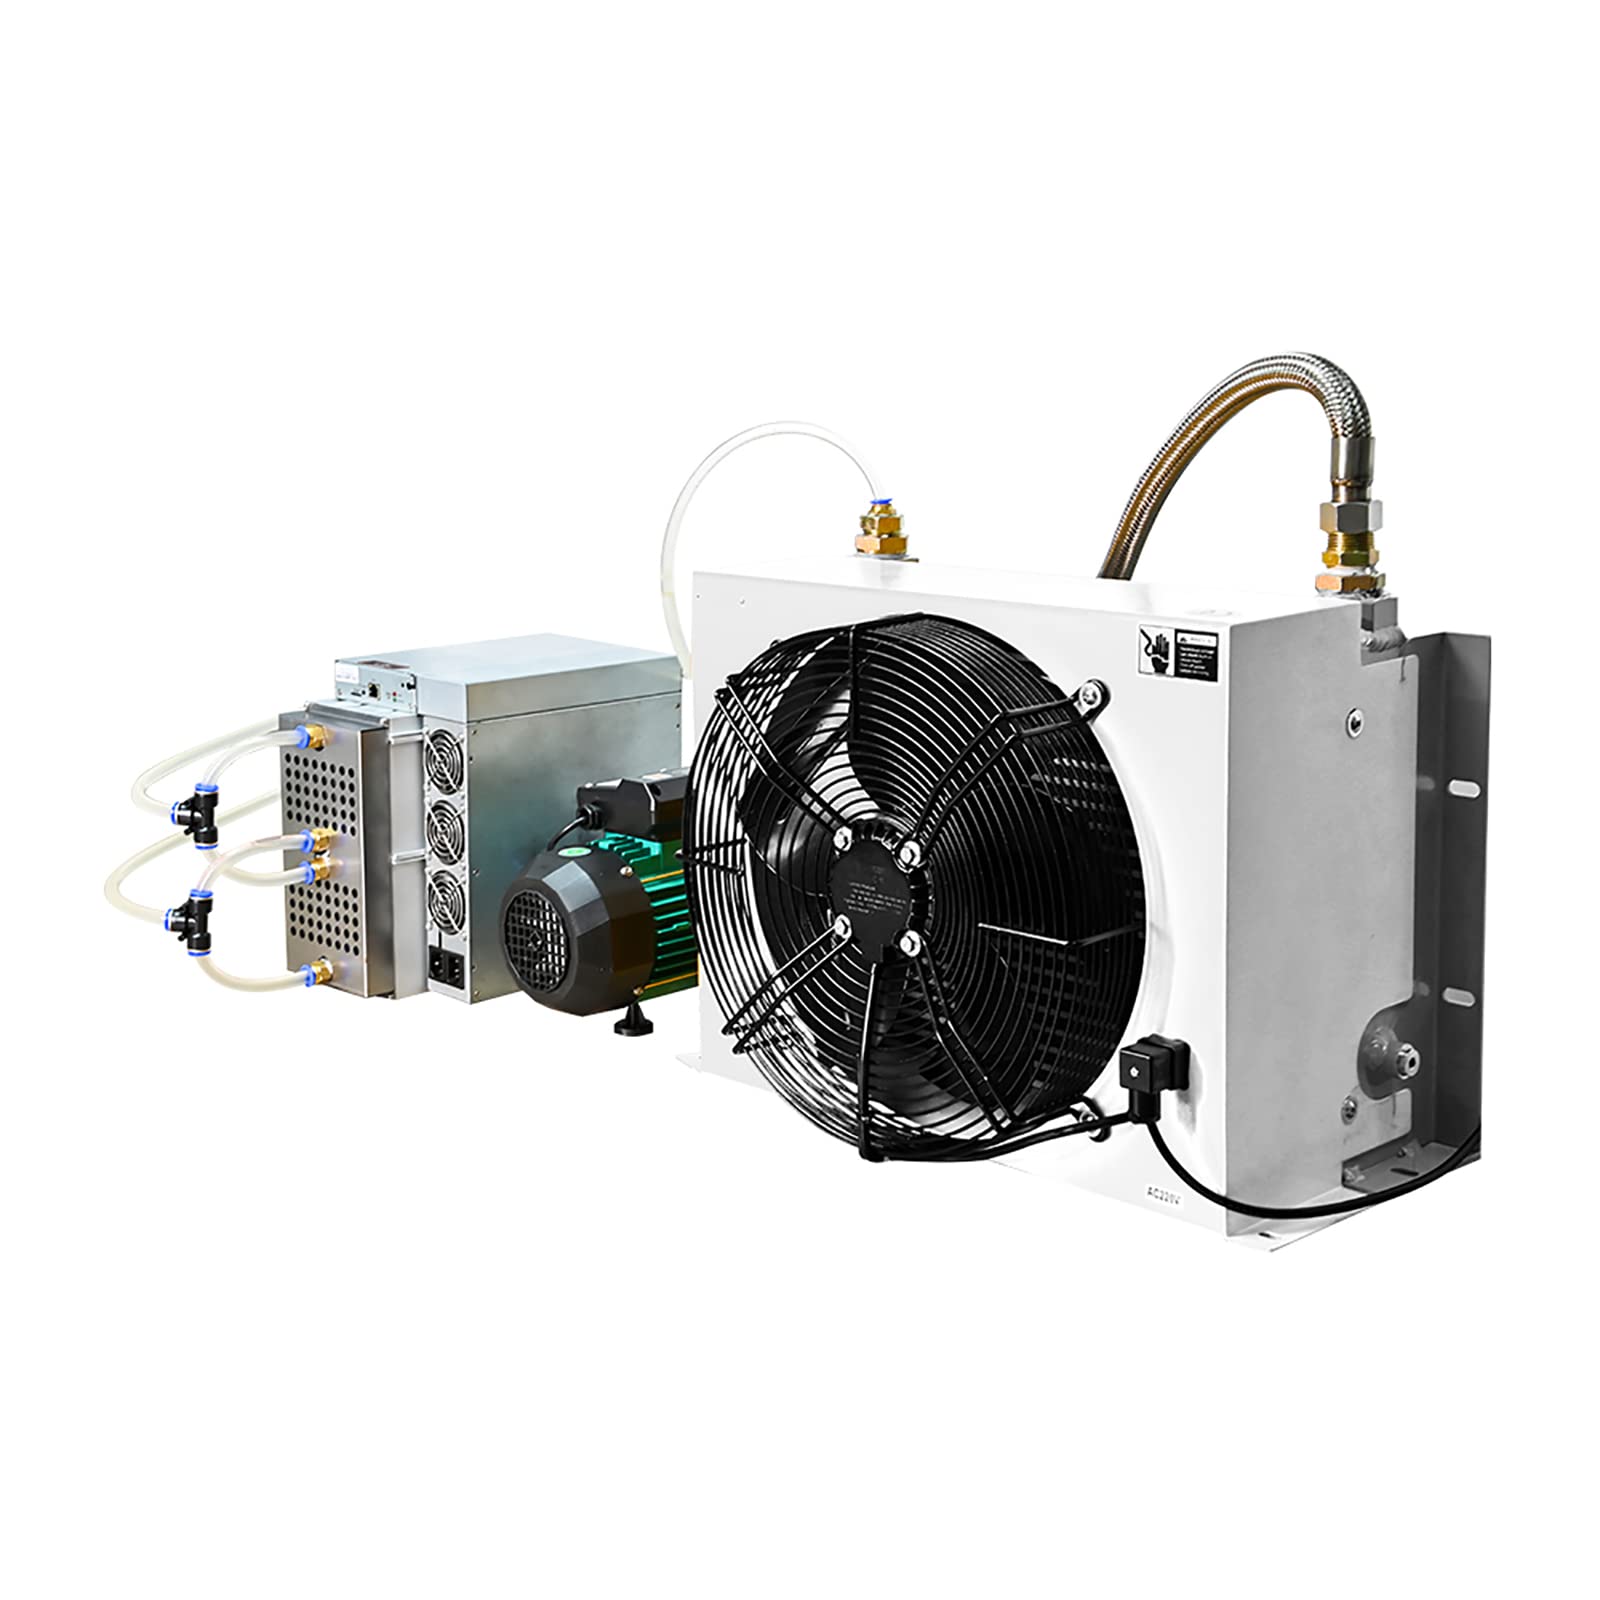 ASIC Miner water cooling system